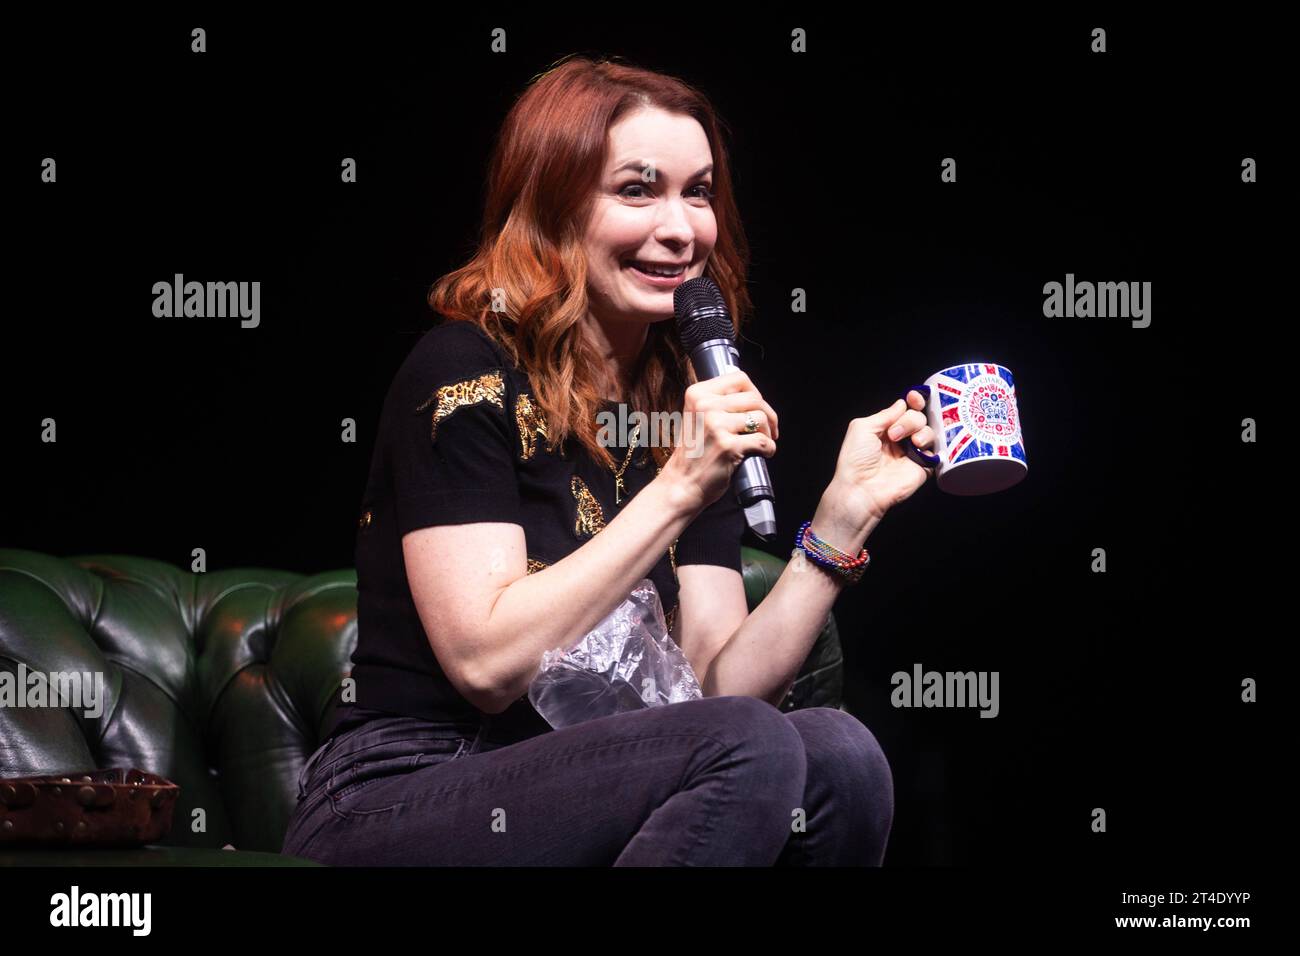 Felicia Day Day Two of MCM Comic Con at ExCeL exhibition centre in London on October 27, 2023 - BANG MEDIA INTERNATIONAL FAMOUS PICTURES 28 HOLMES ROAD LONDON NW5 3AB UNITED KINGDOM tel 44 0 02 7485 1005 email: paulsmithbangshowbiz.com or tombangshowbiz.com Copyright: xTomxRosex adnrp931 Credit: Imago/Alamy Live News Stock Photo